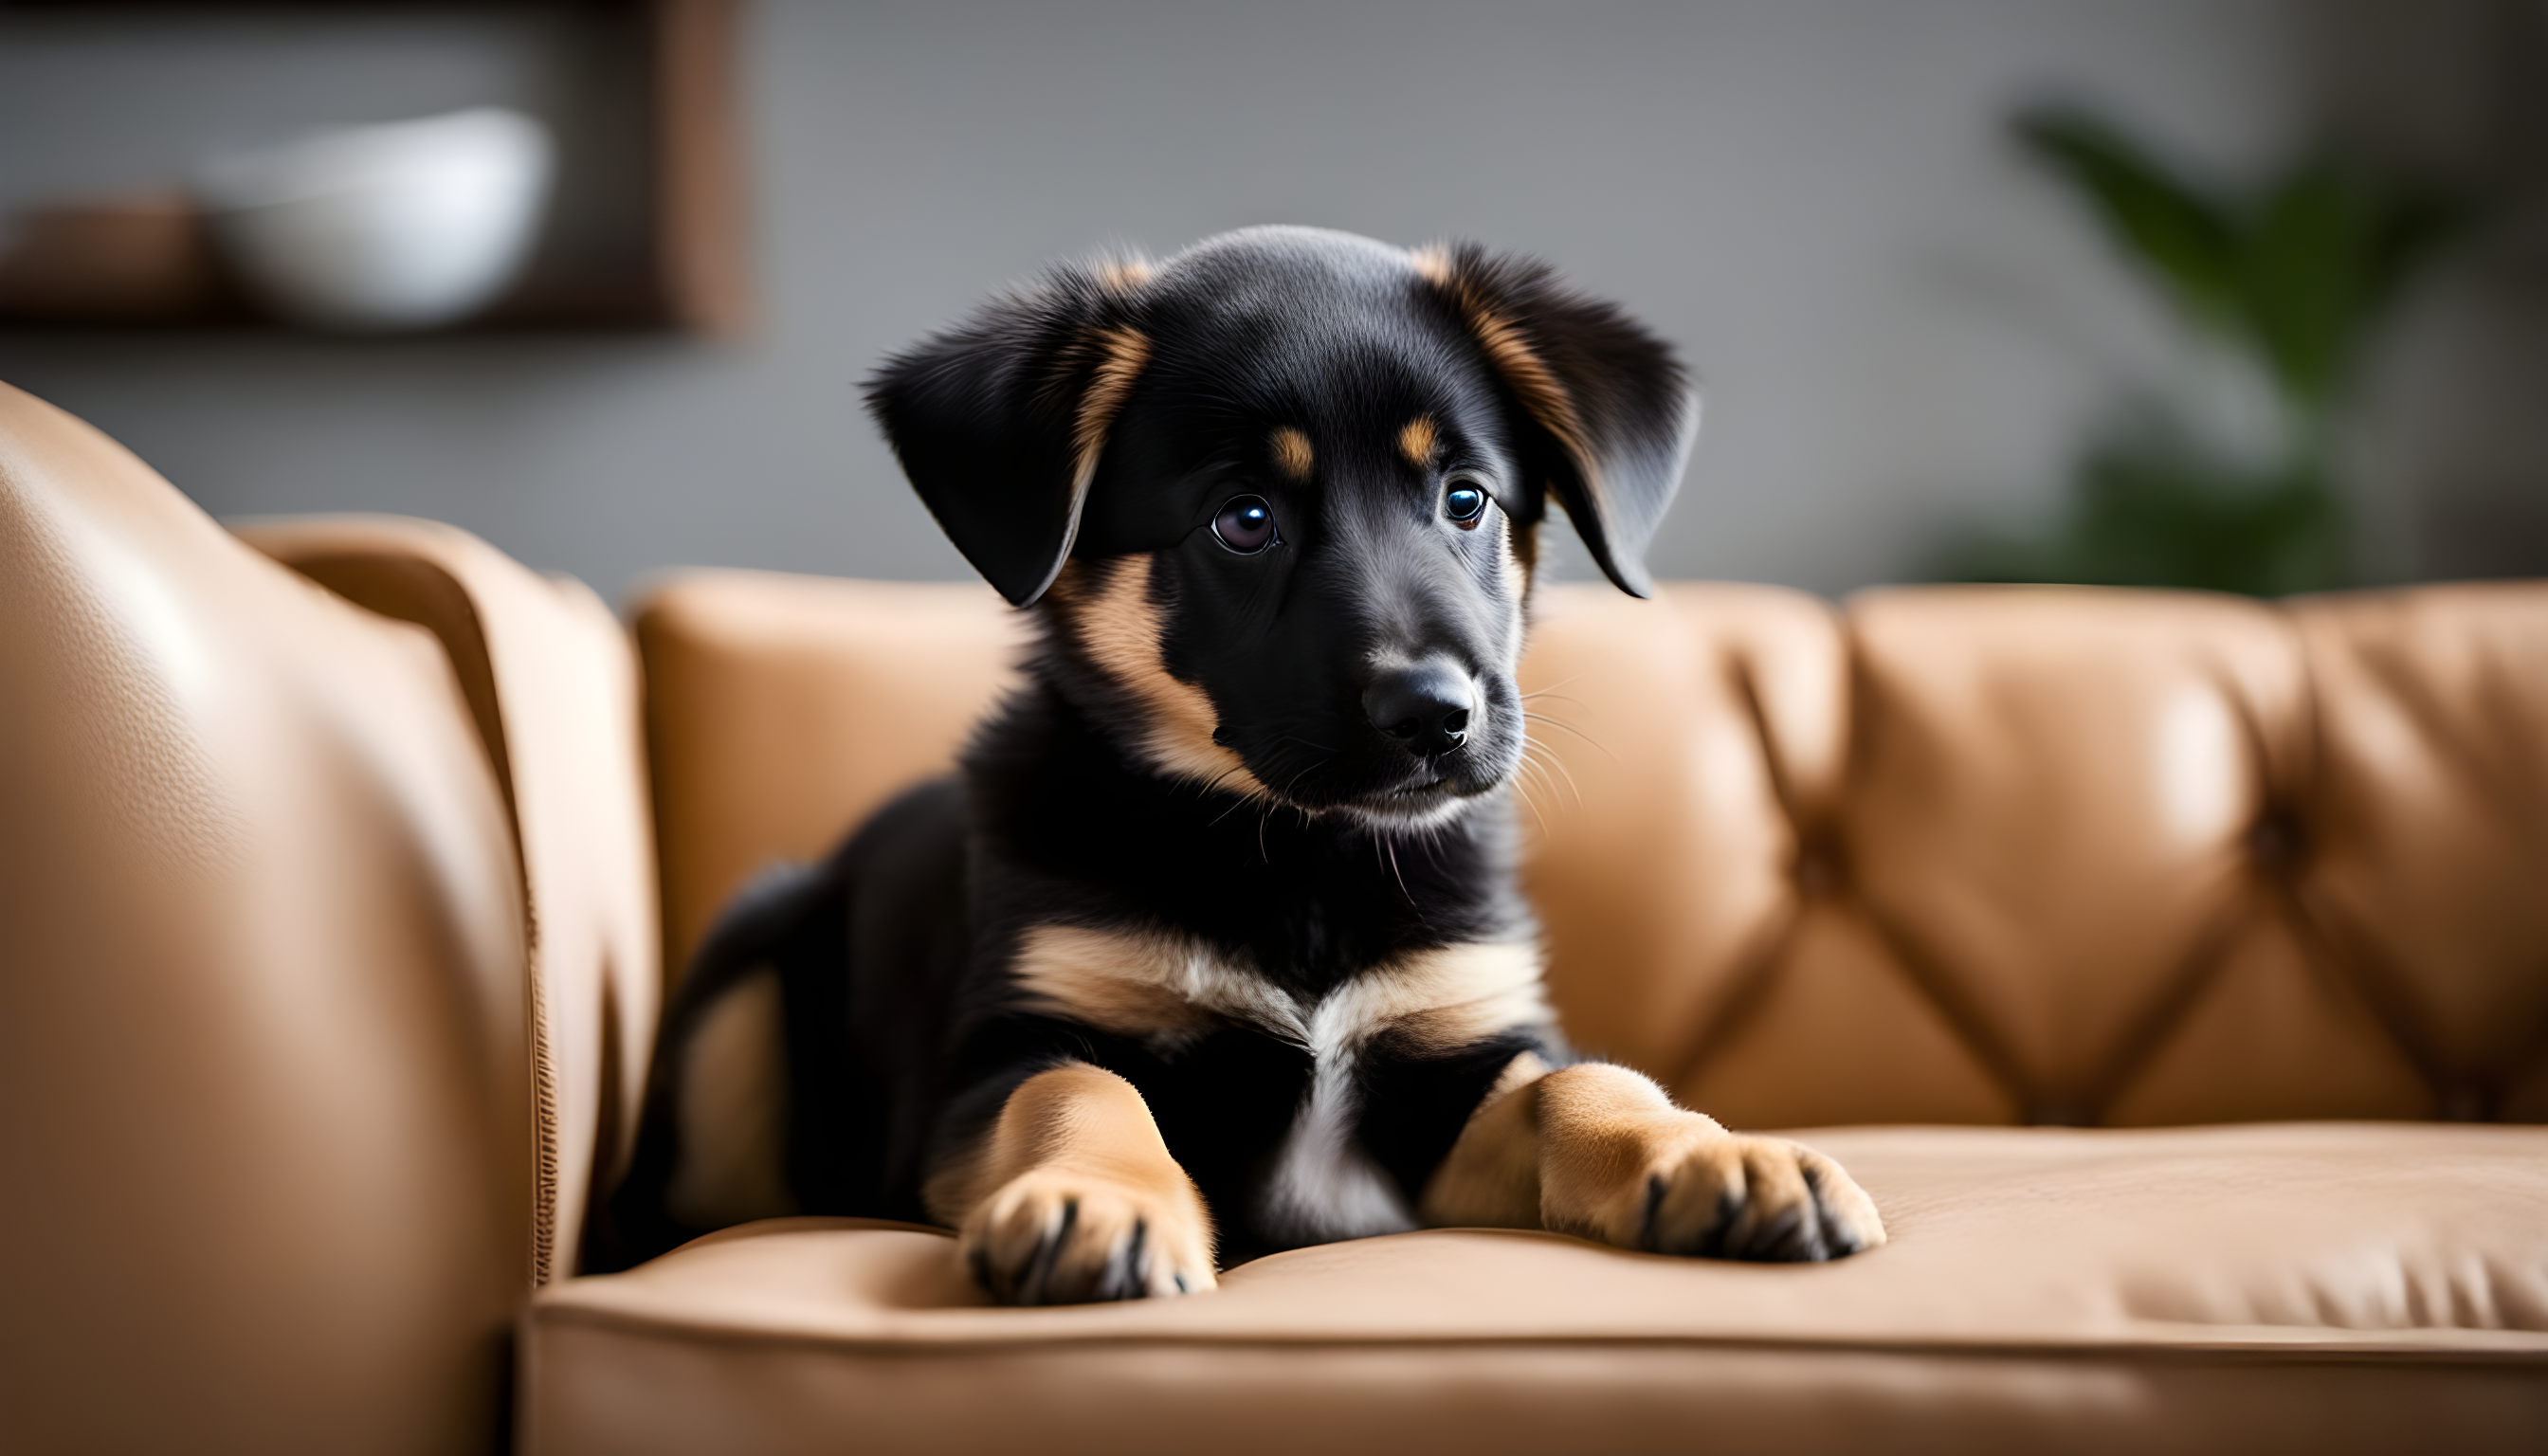 "Adorable Sheprador puppy exploring its new home and looking puzzled by a sofa."